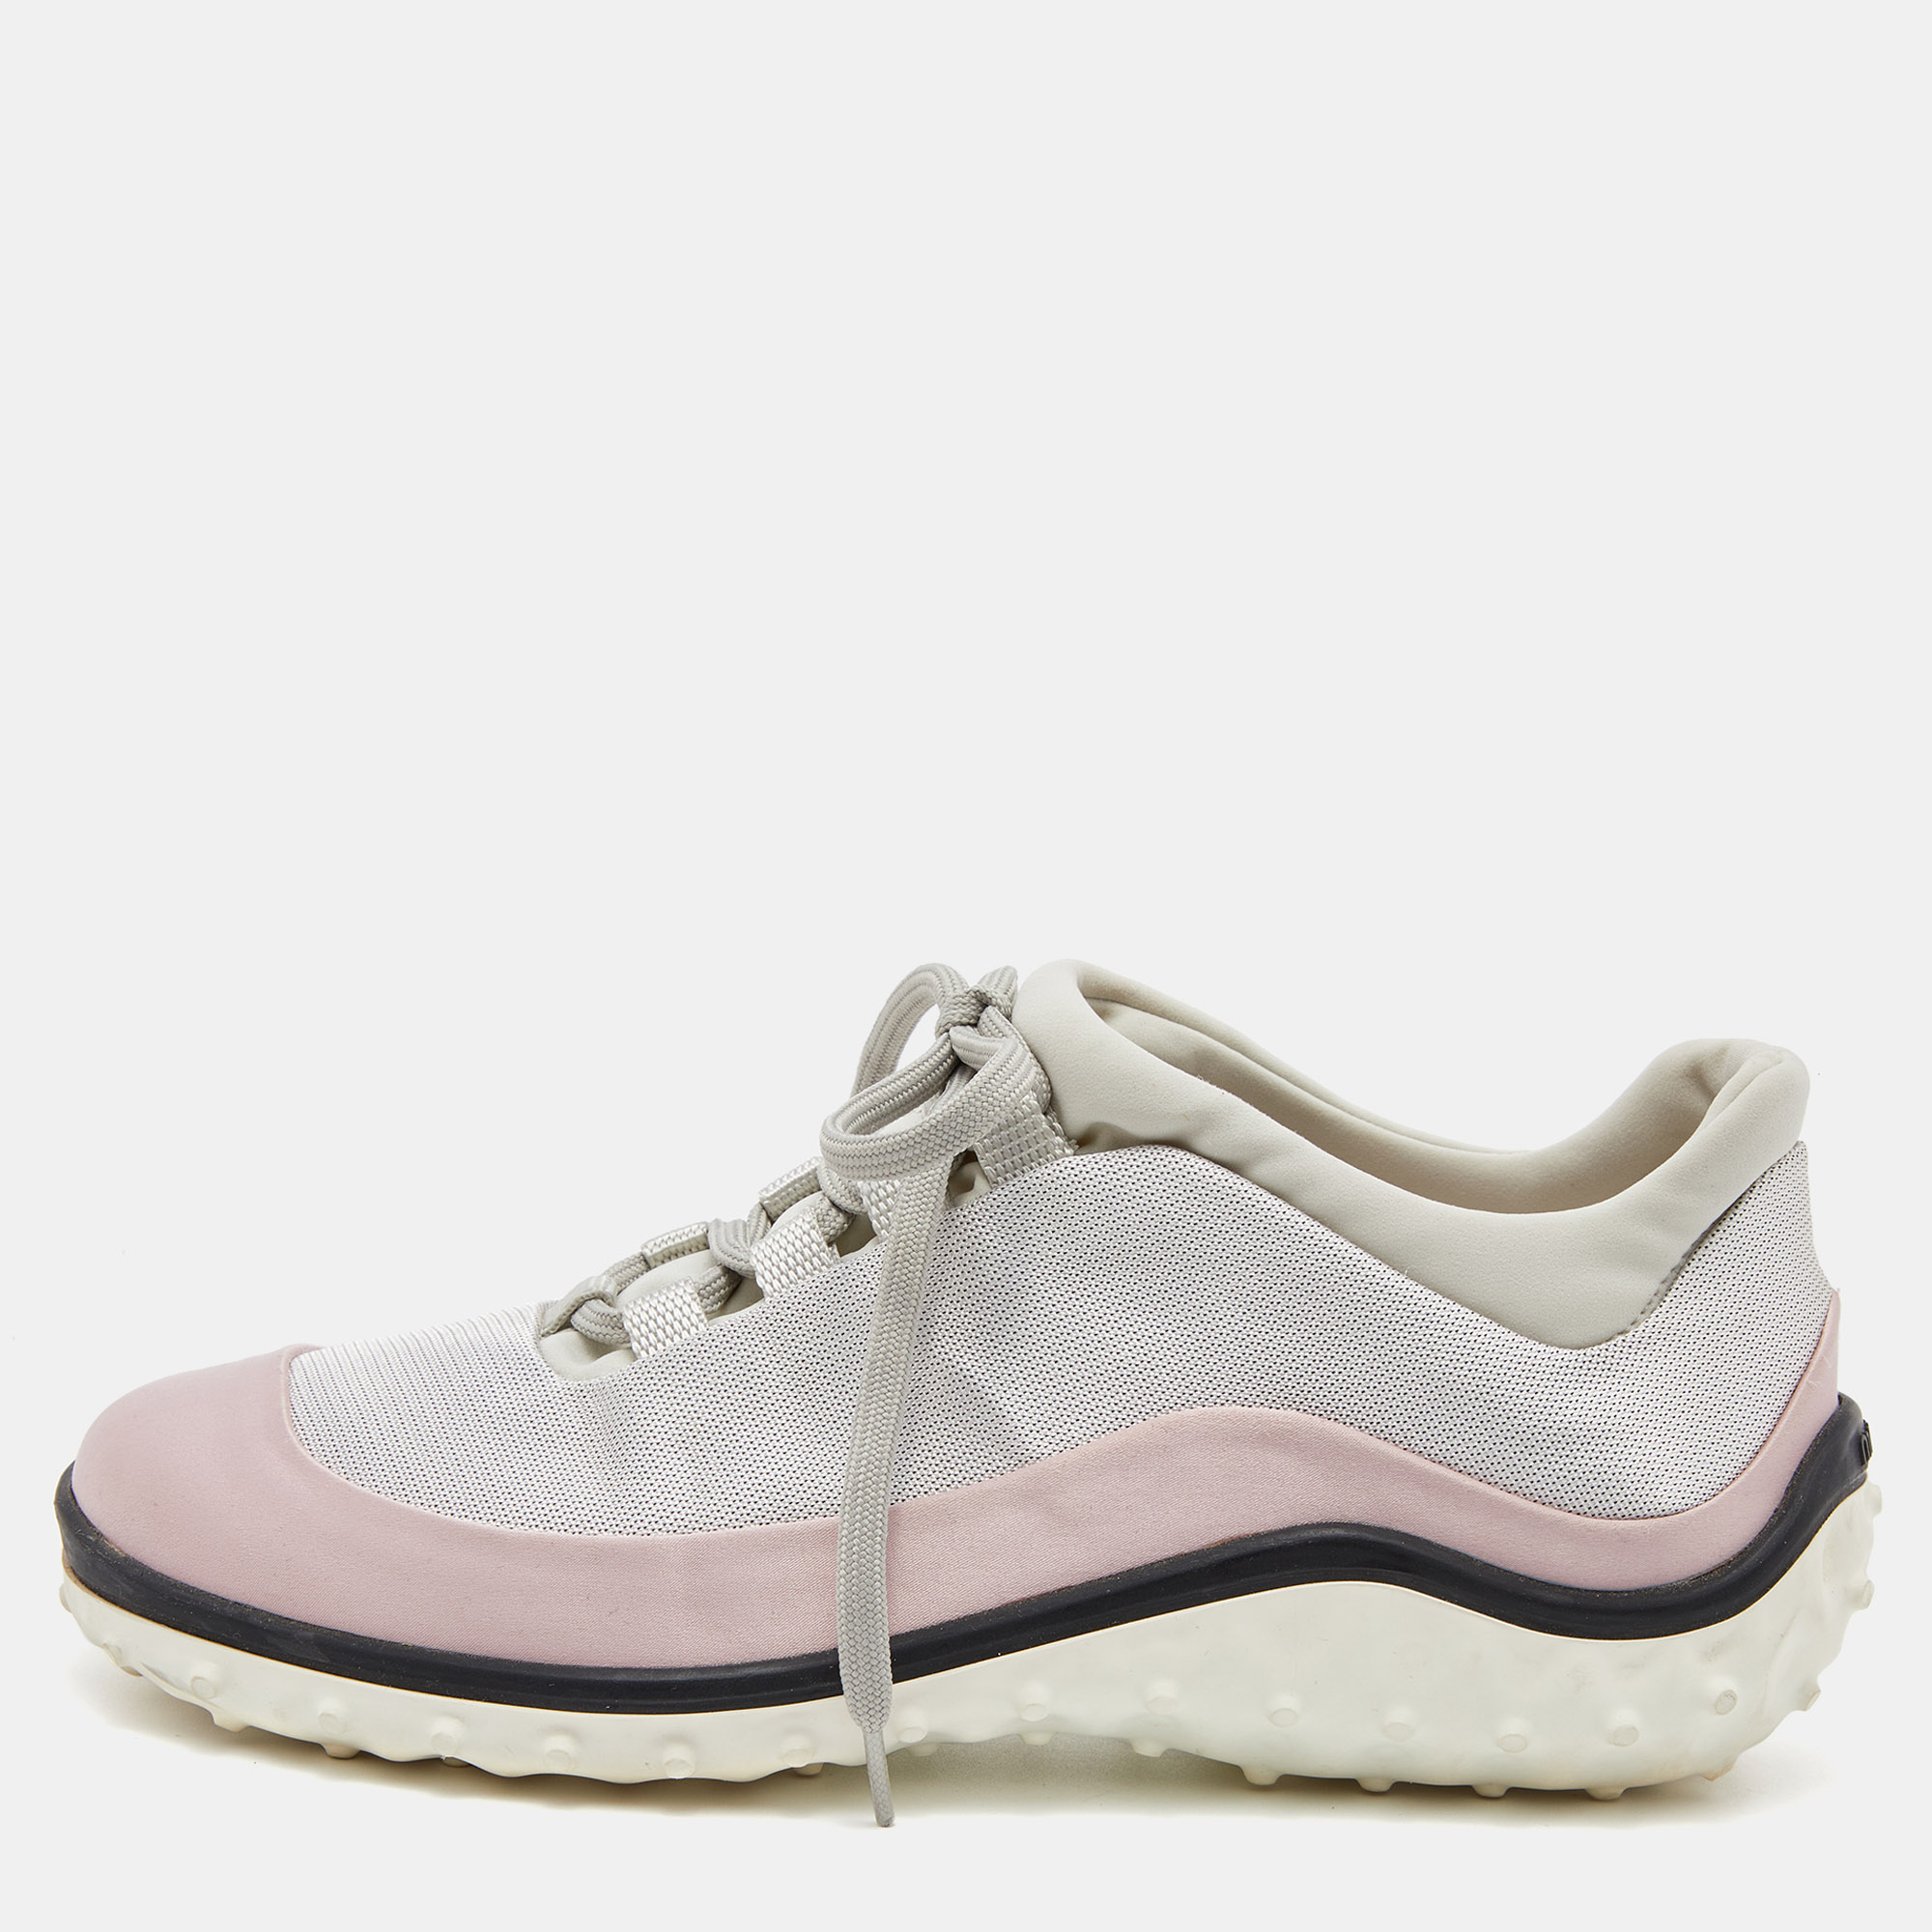 Pre-owned Miu Miu Pink/grey Satin And Fabric Low Top Sneakers Size 36